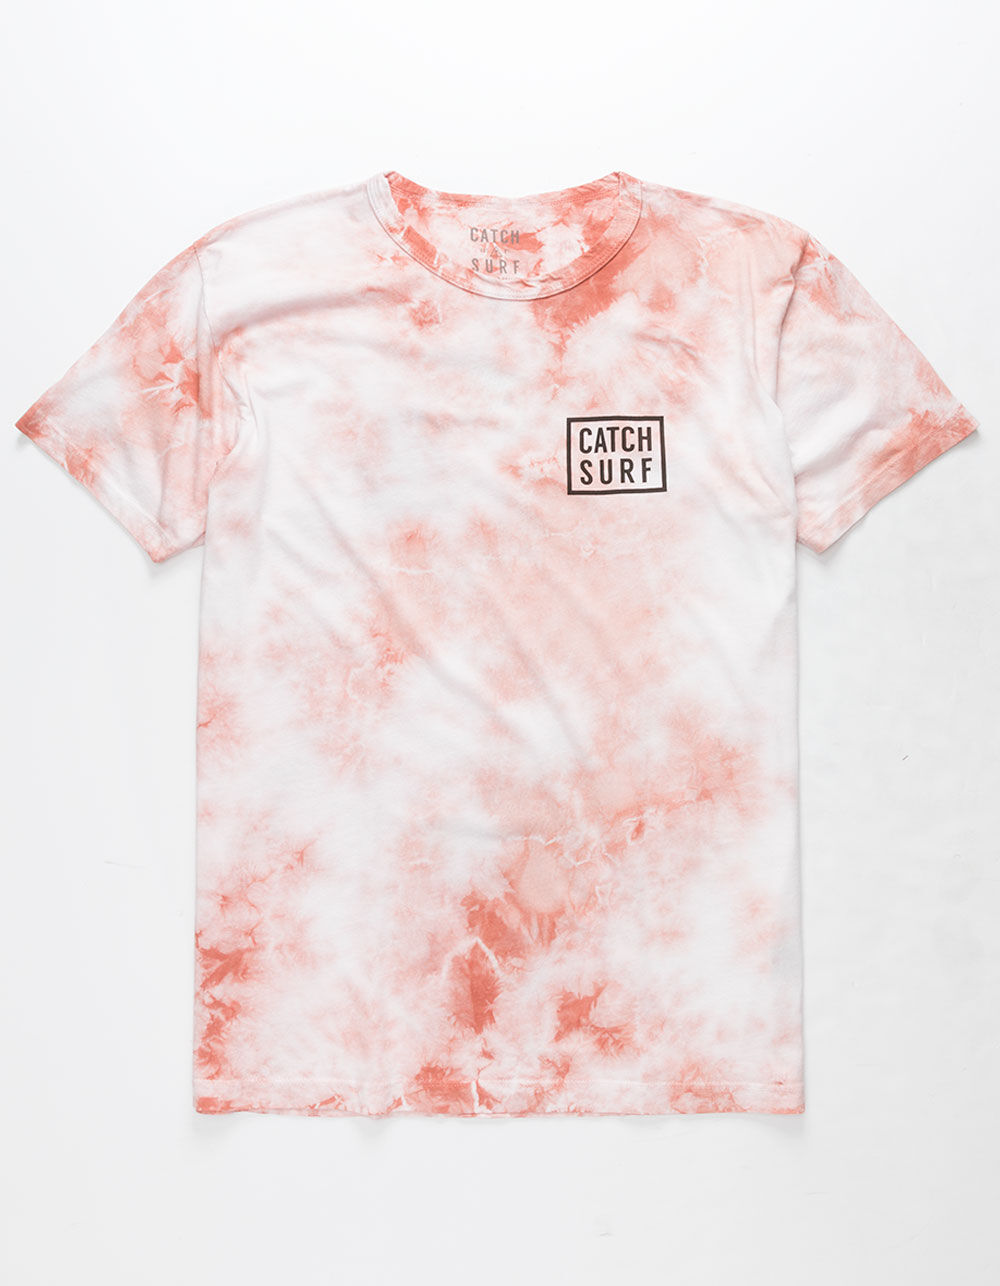 CATCH SURF Stacked Mens T-Shirt - Pink | Tillys